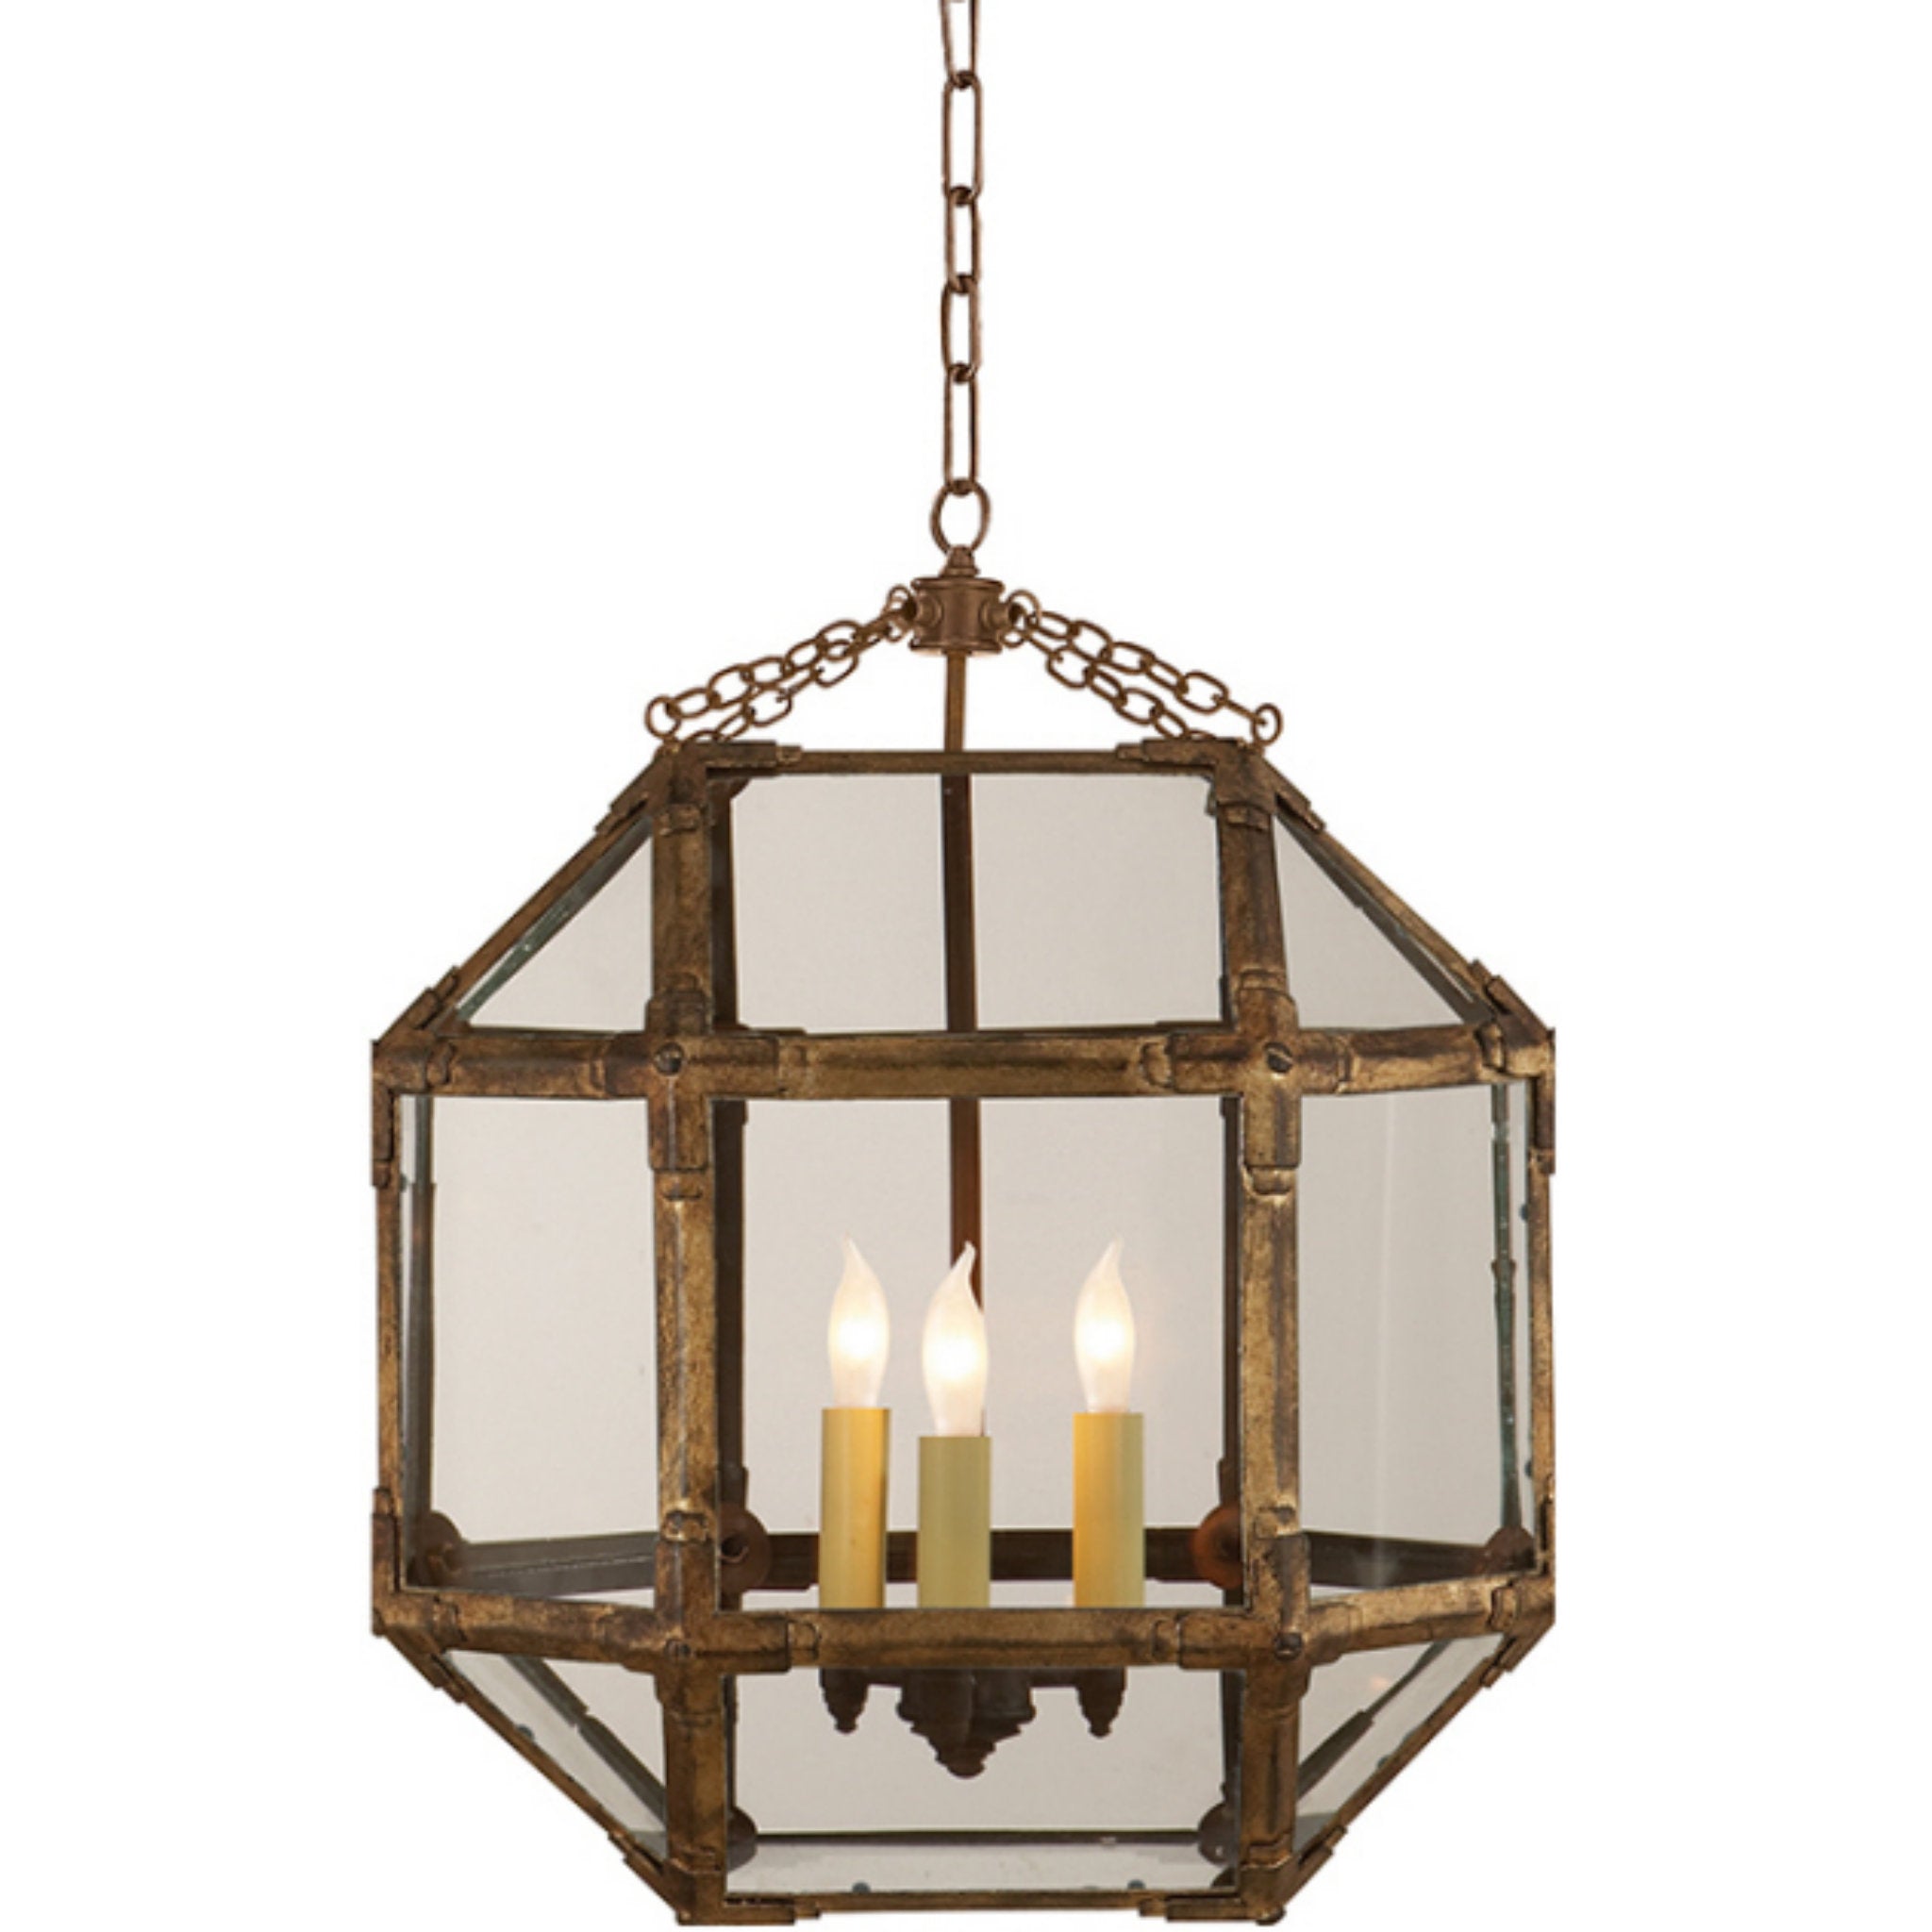 Suzanne Kasler Morris Medium Lantern in Gilded Iron with Clear Glass